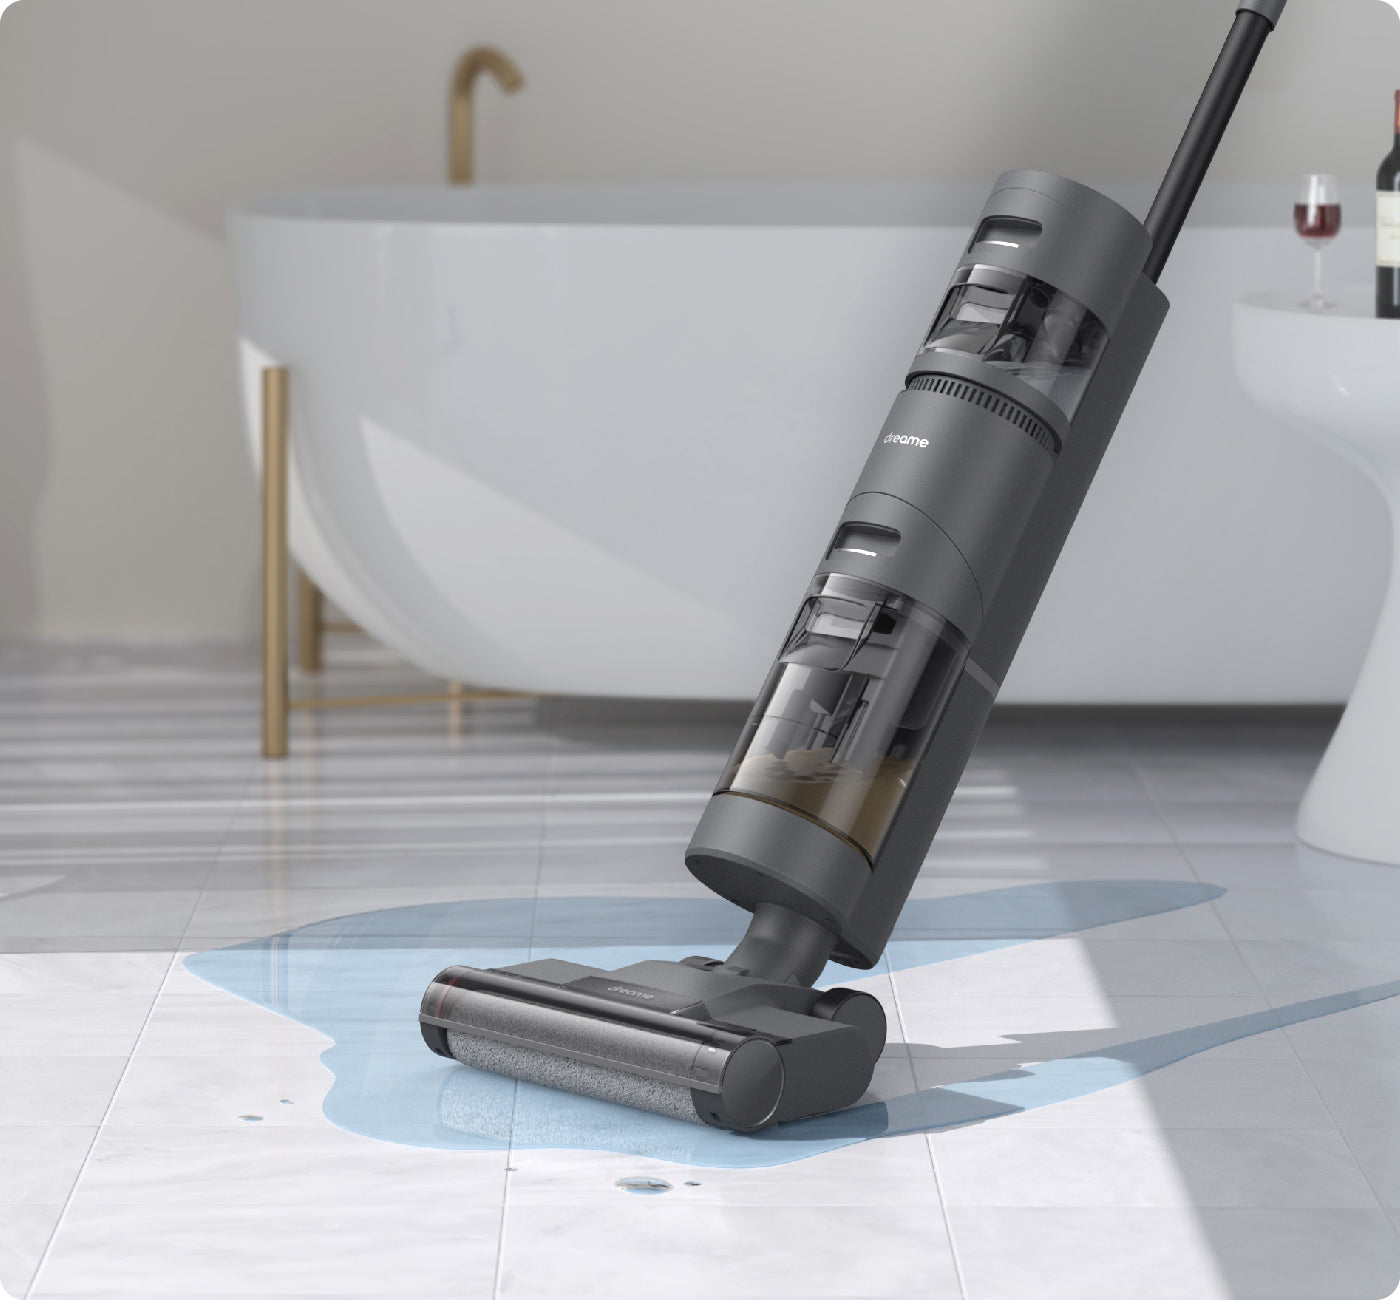 e-Tax  27.25% OFF on DREAME Gray Dreame H12 Pro Cordless Wet Dry Vacuum  Cleaner